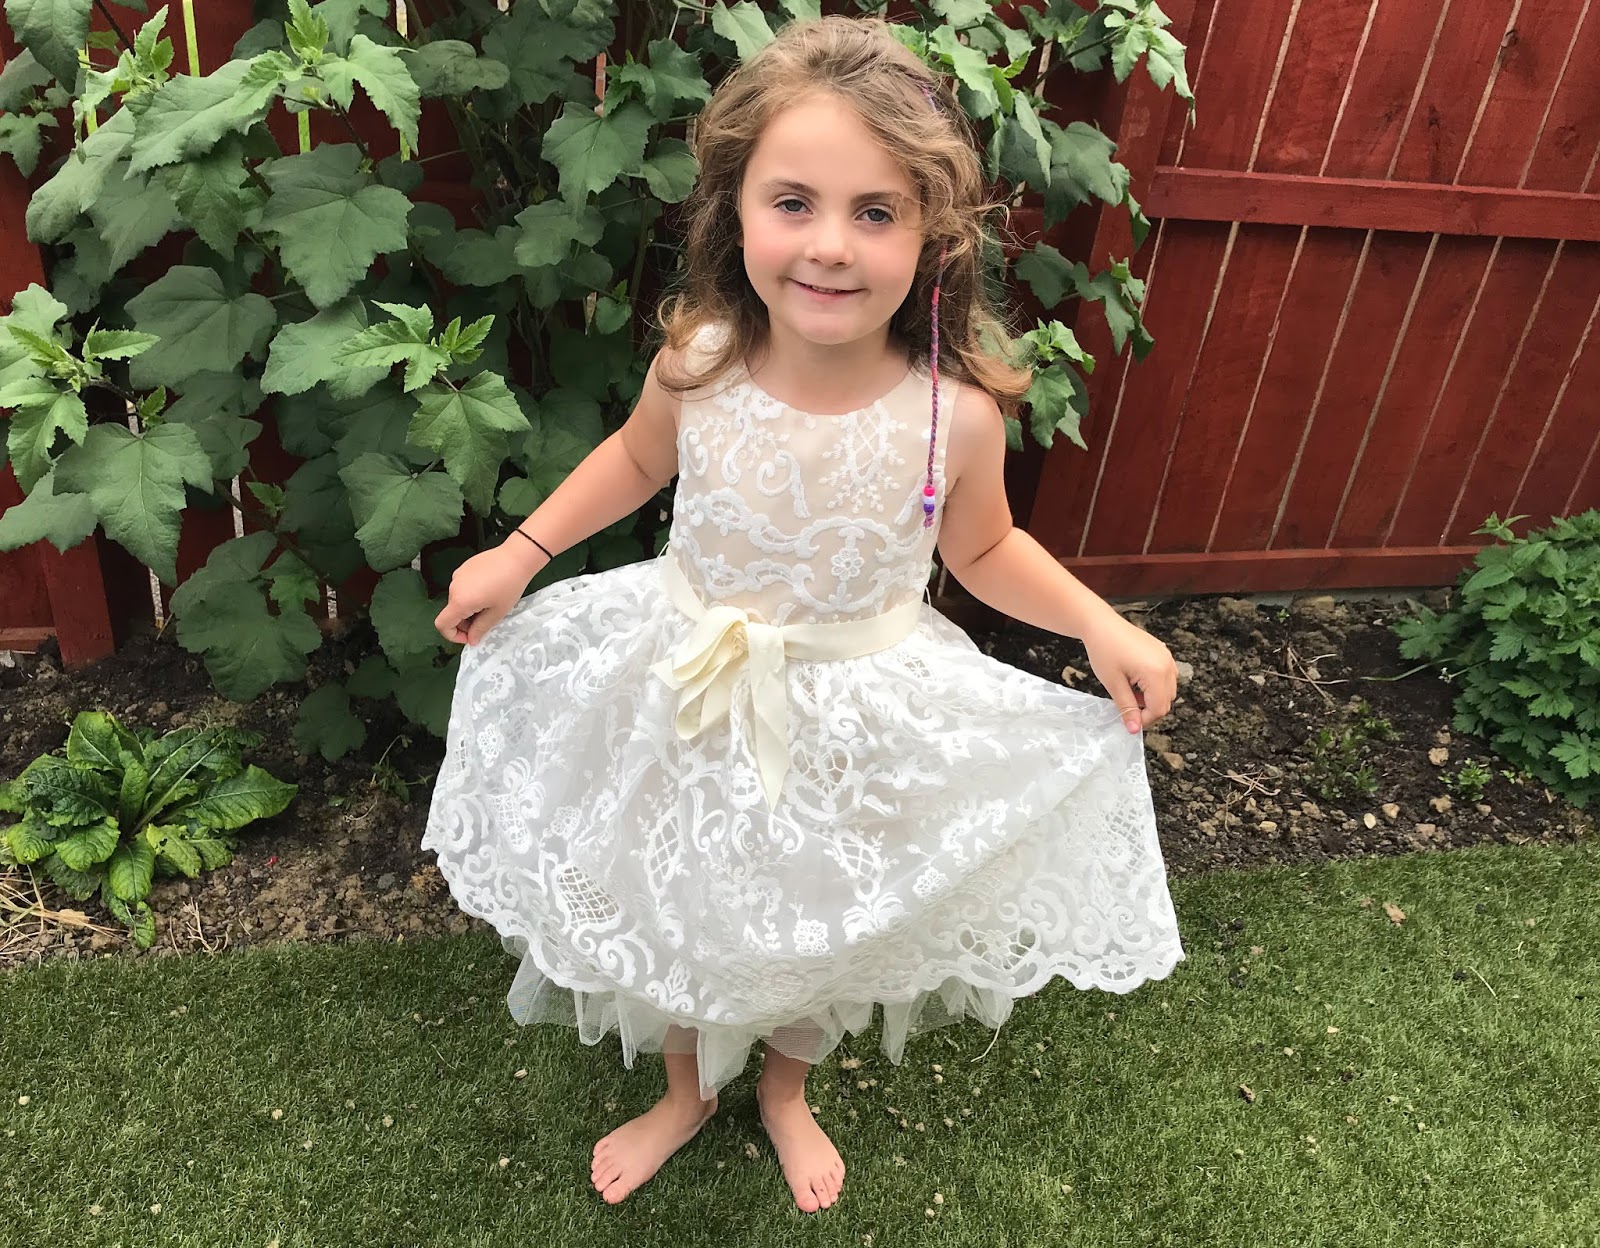 Wedding Outfits From Roco Clothing | Newcastle Family Life